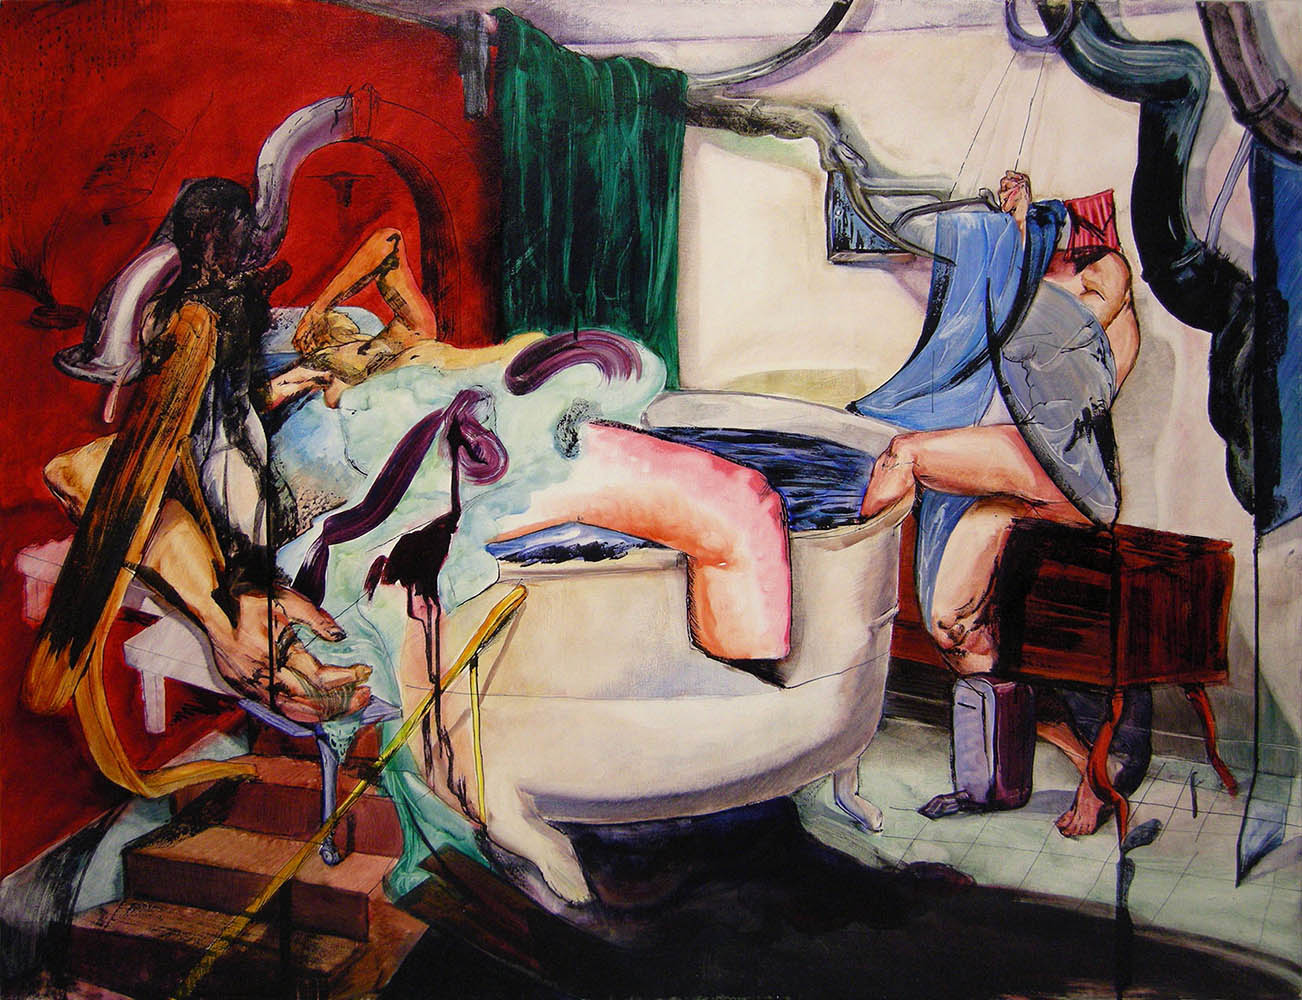 Dylan Rabe - Ablutions